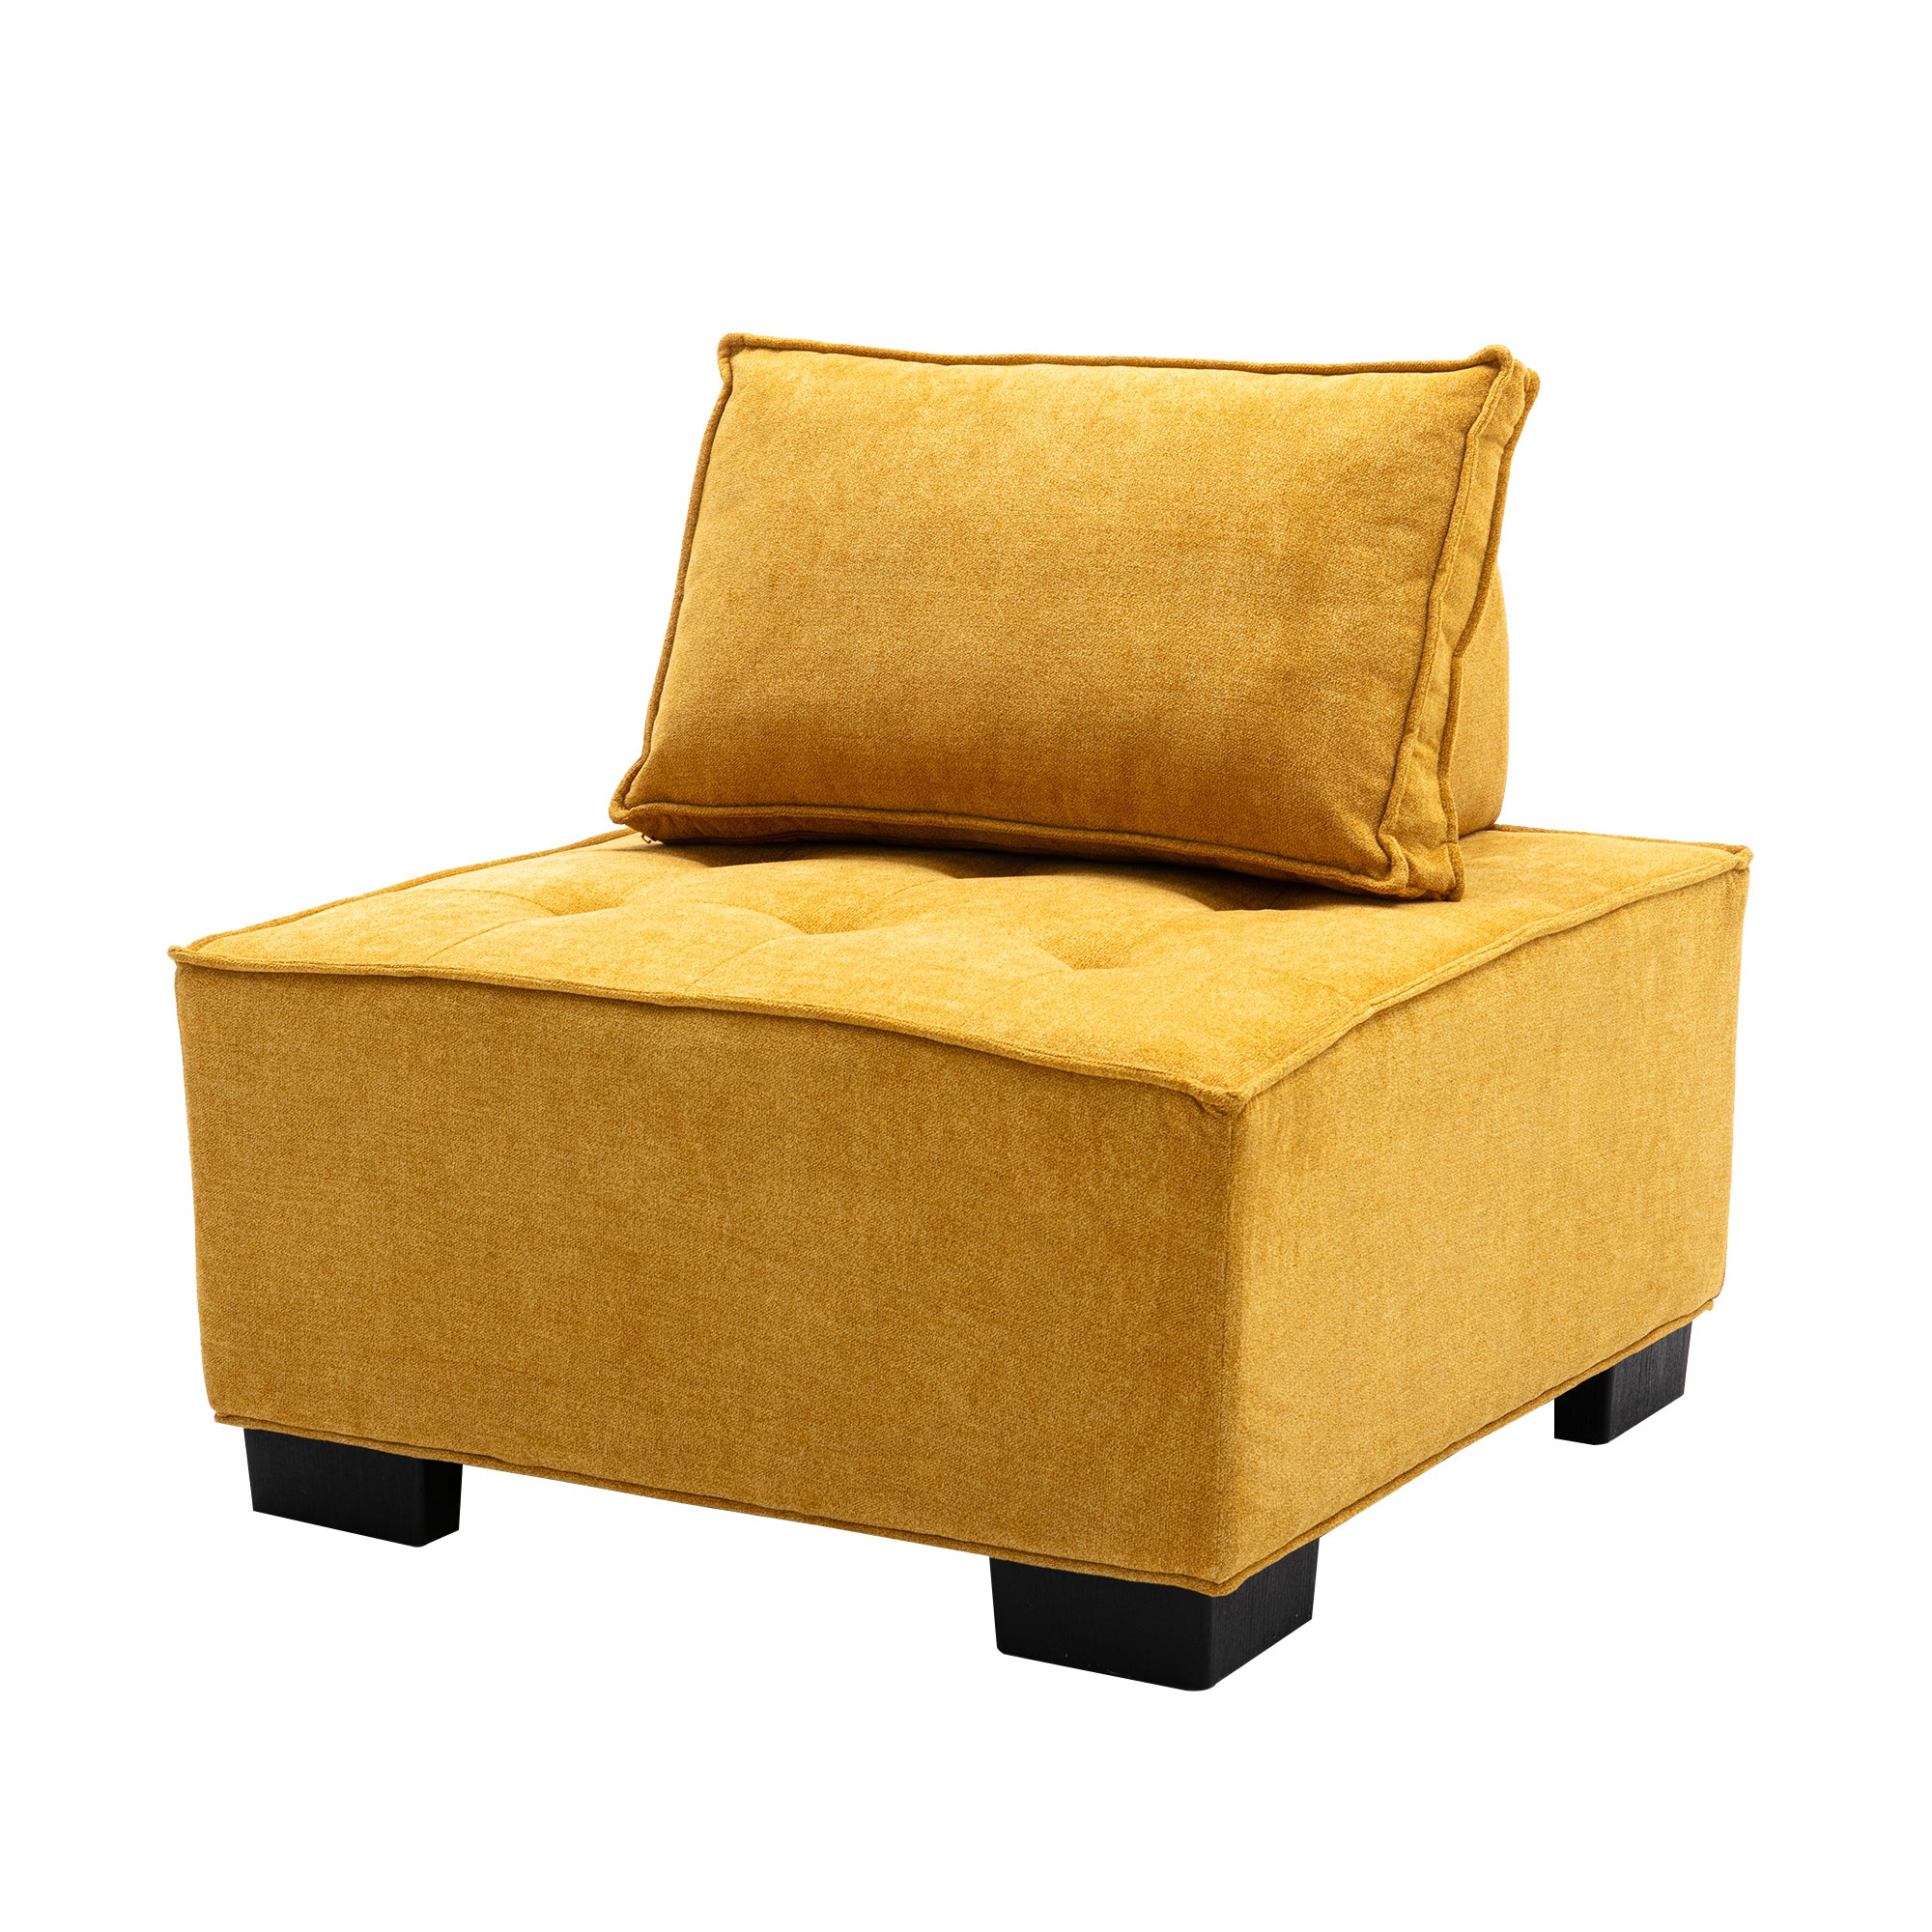 COOMORE Living Room Sofa Chair